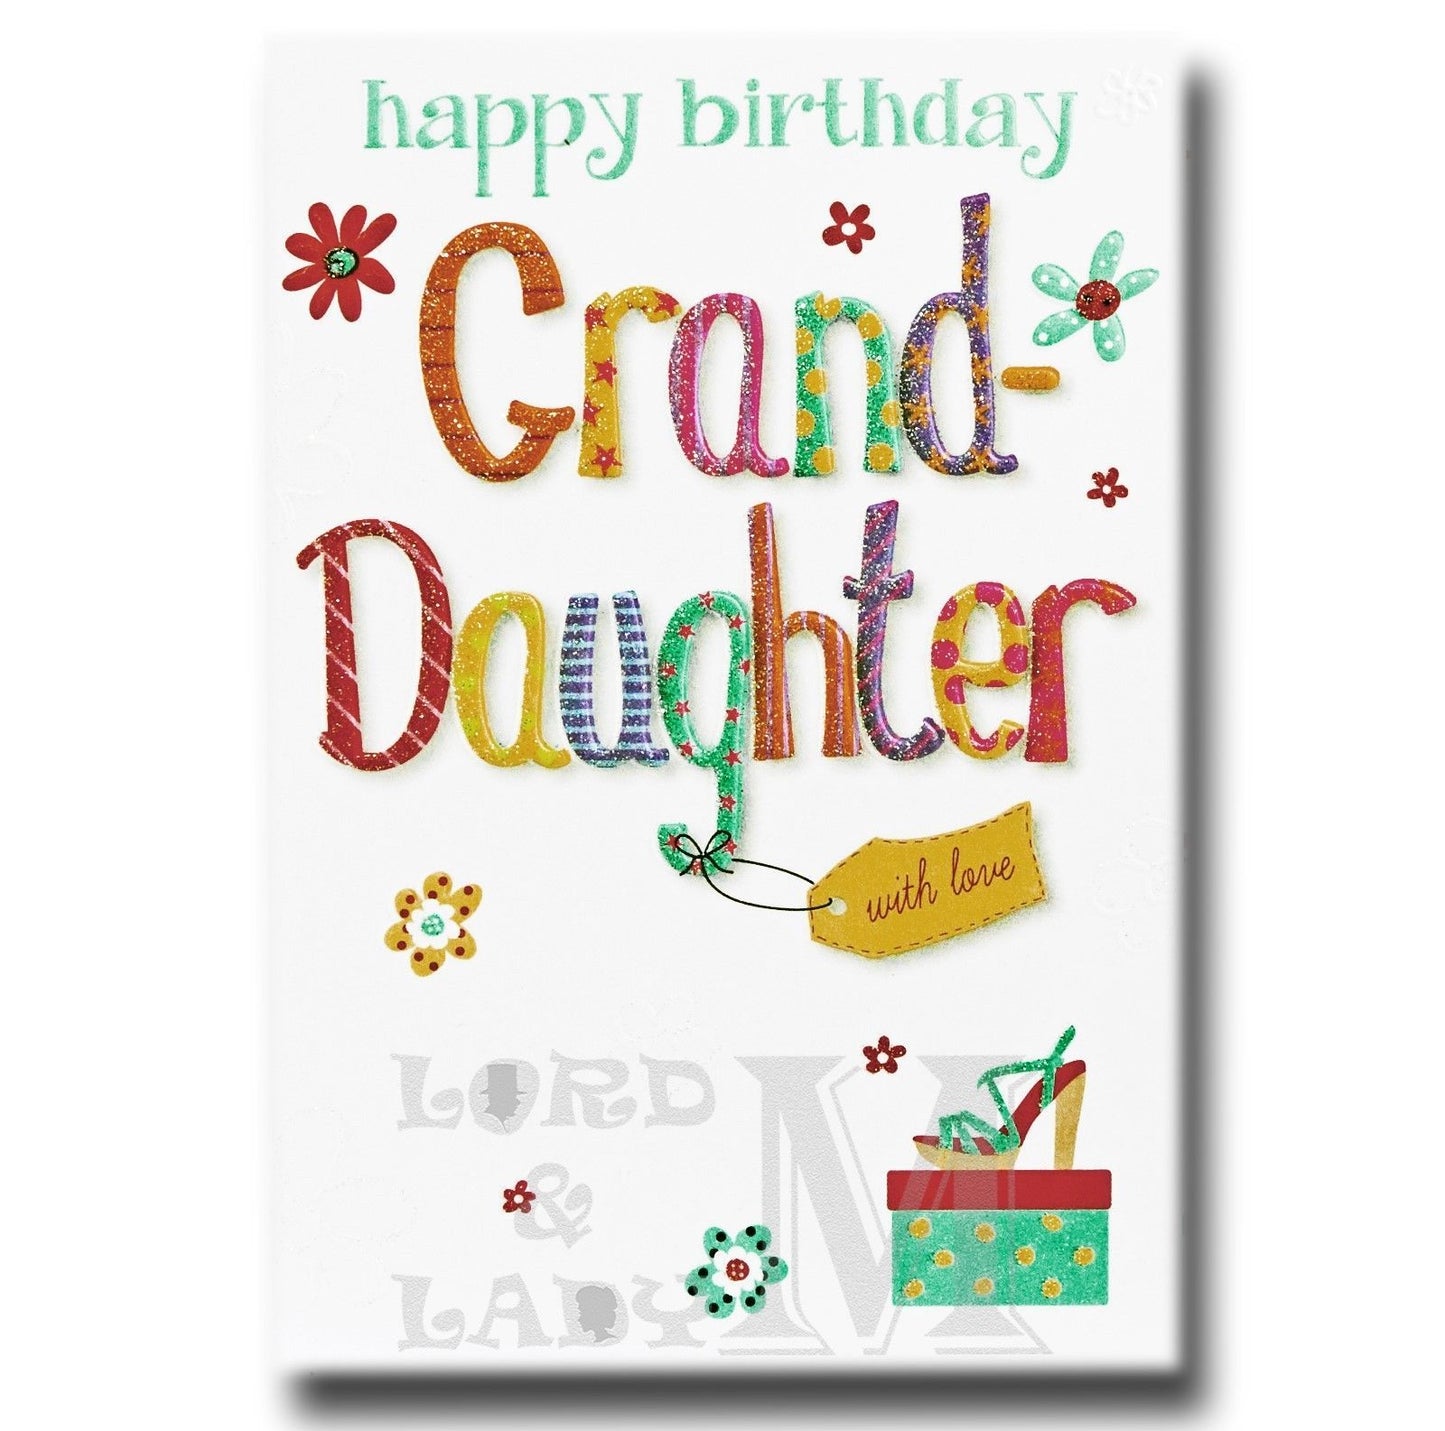 19cm - Happy Birthday Granddaughter With Love - H